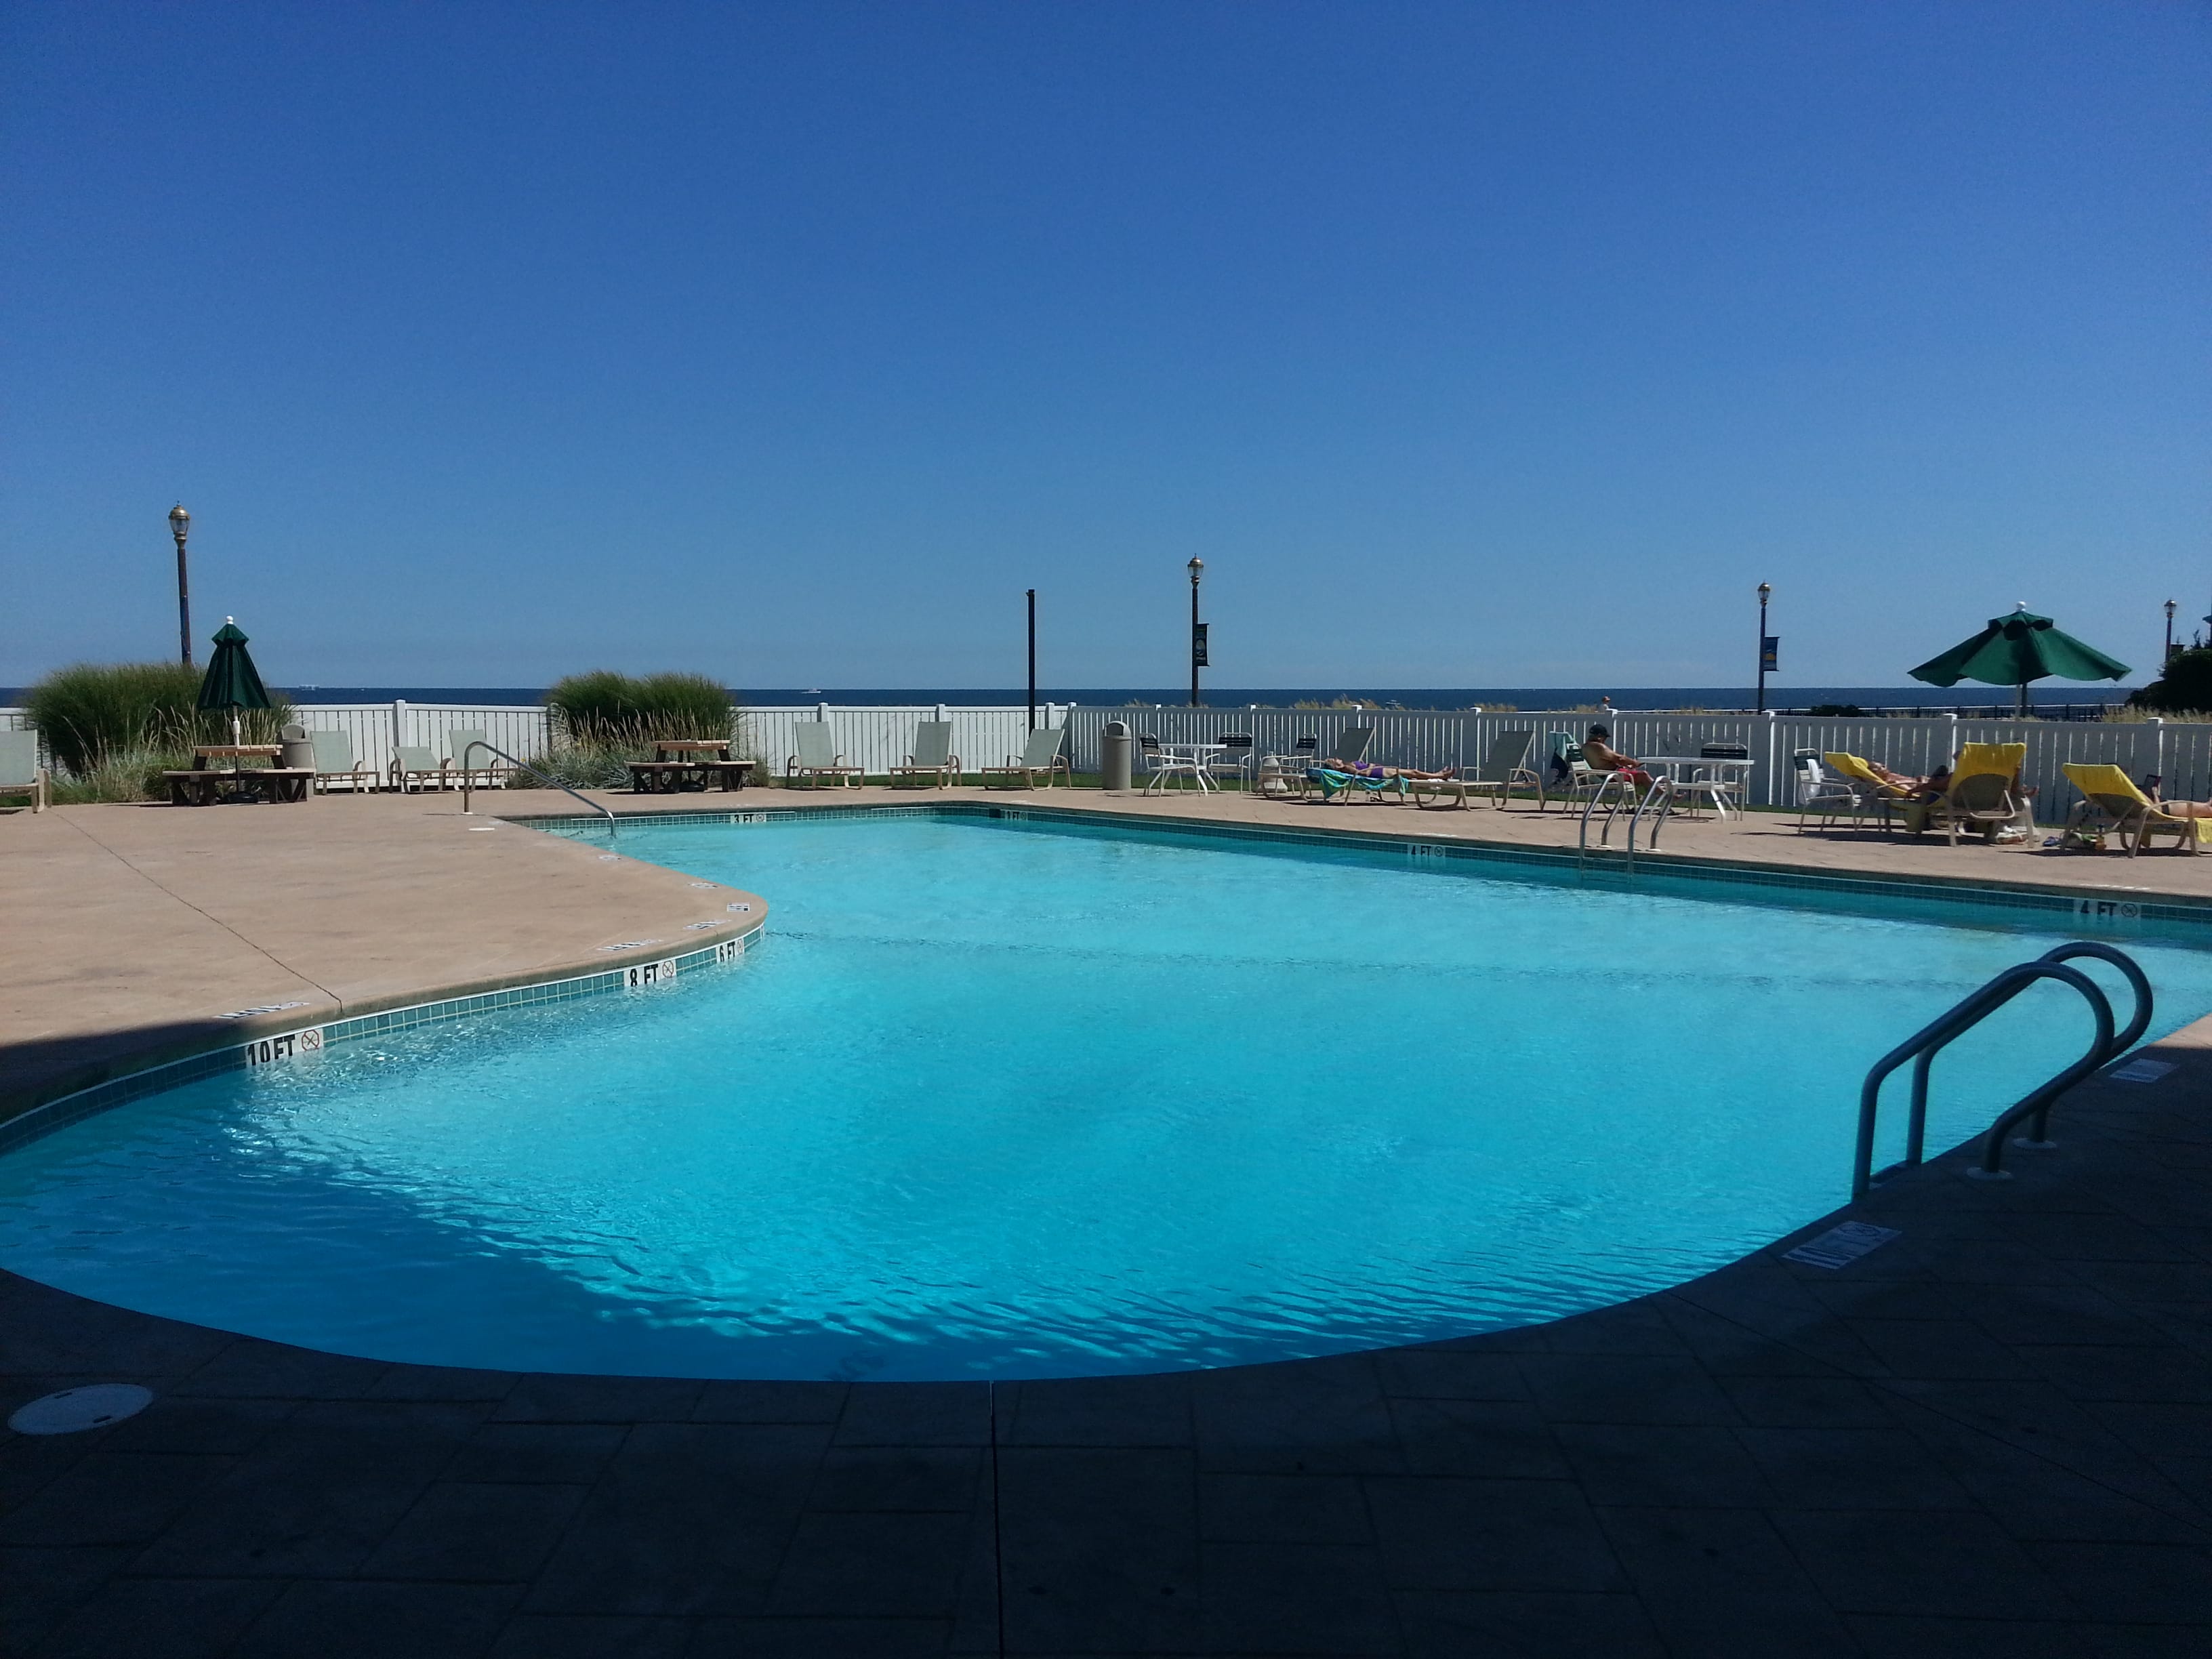 Among the Anchorage amenities is the sparkling pool overlooking the beachfront.